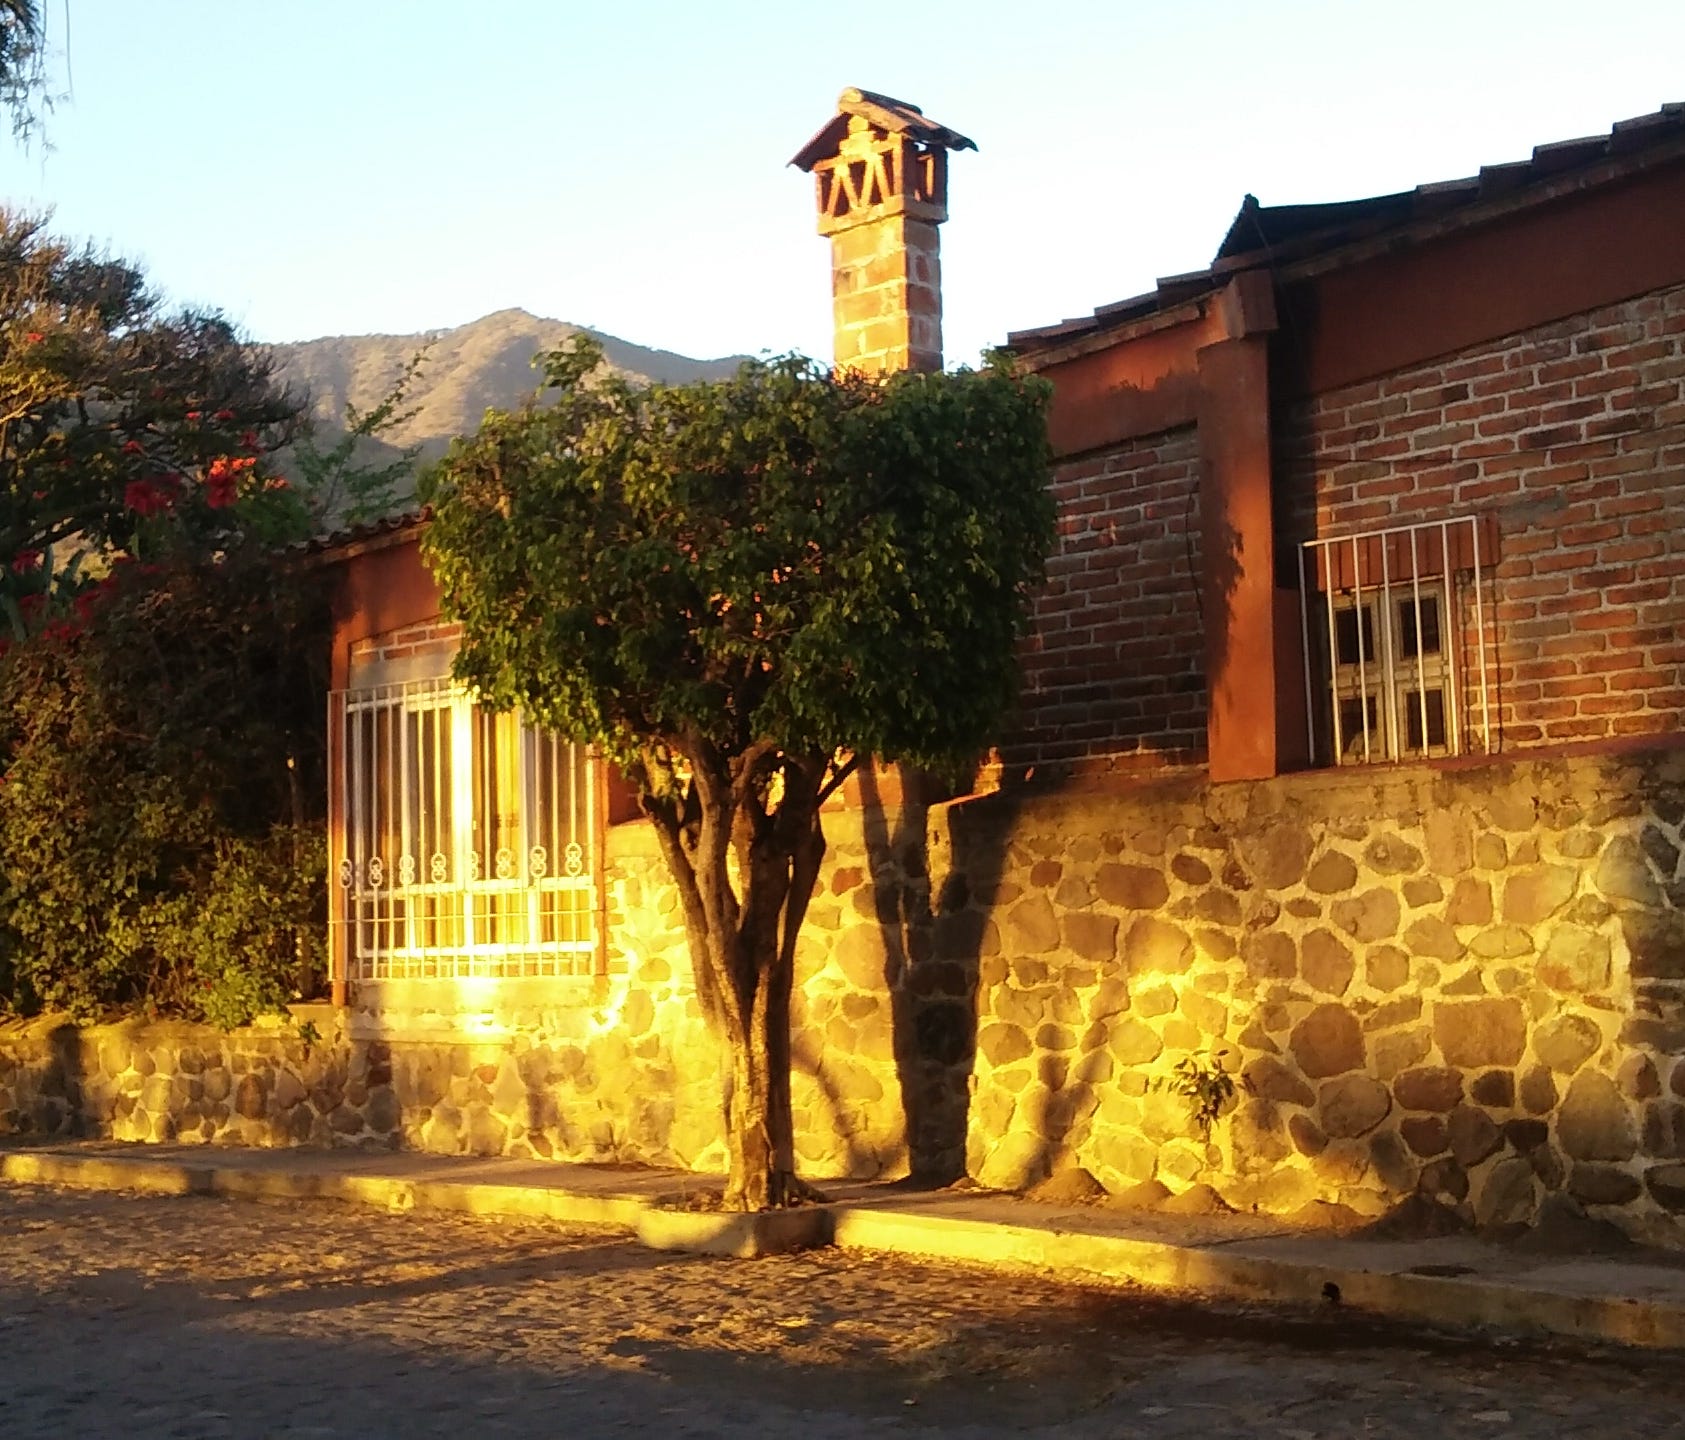 Ajijic is a very walkable town and a delight for the eye.